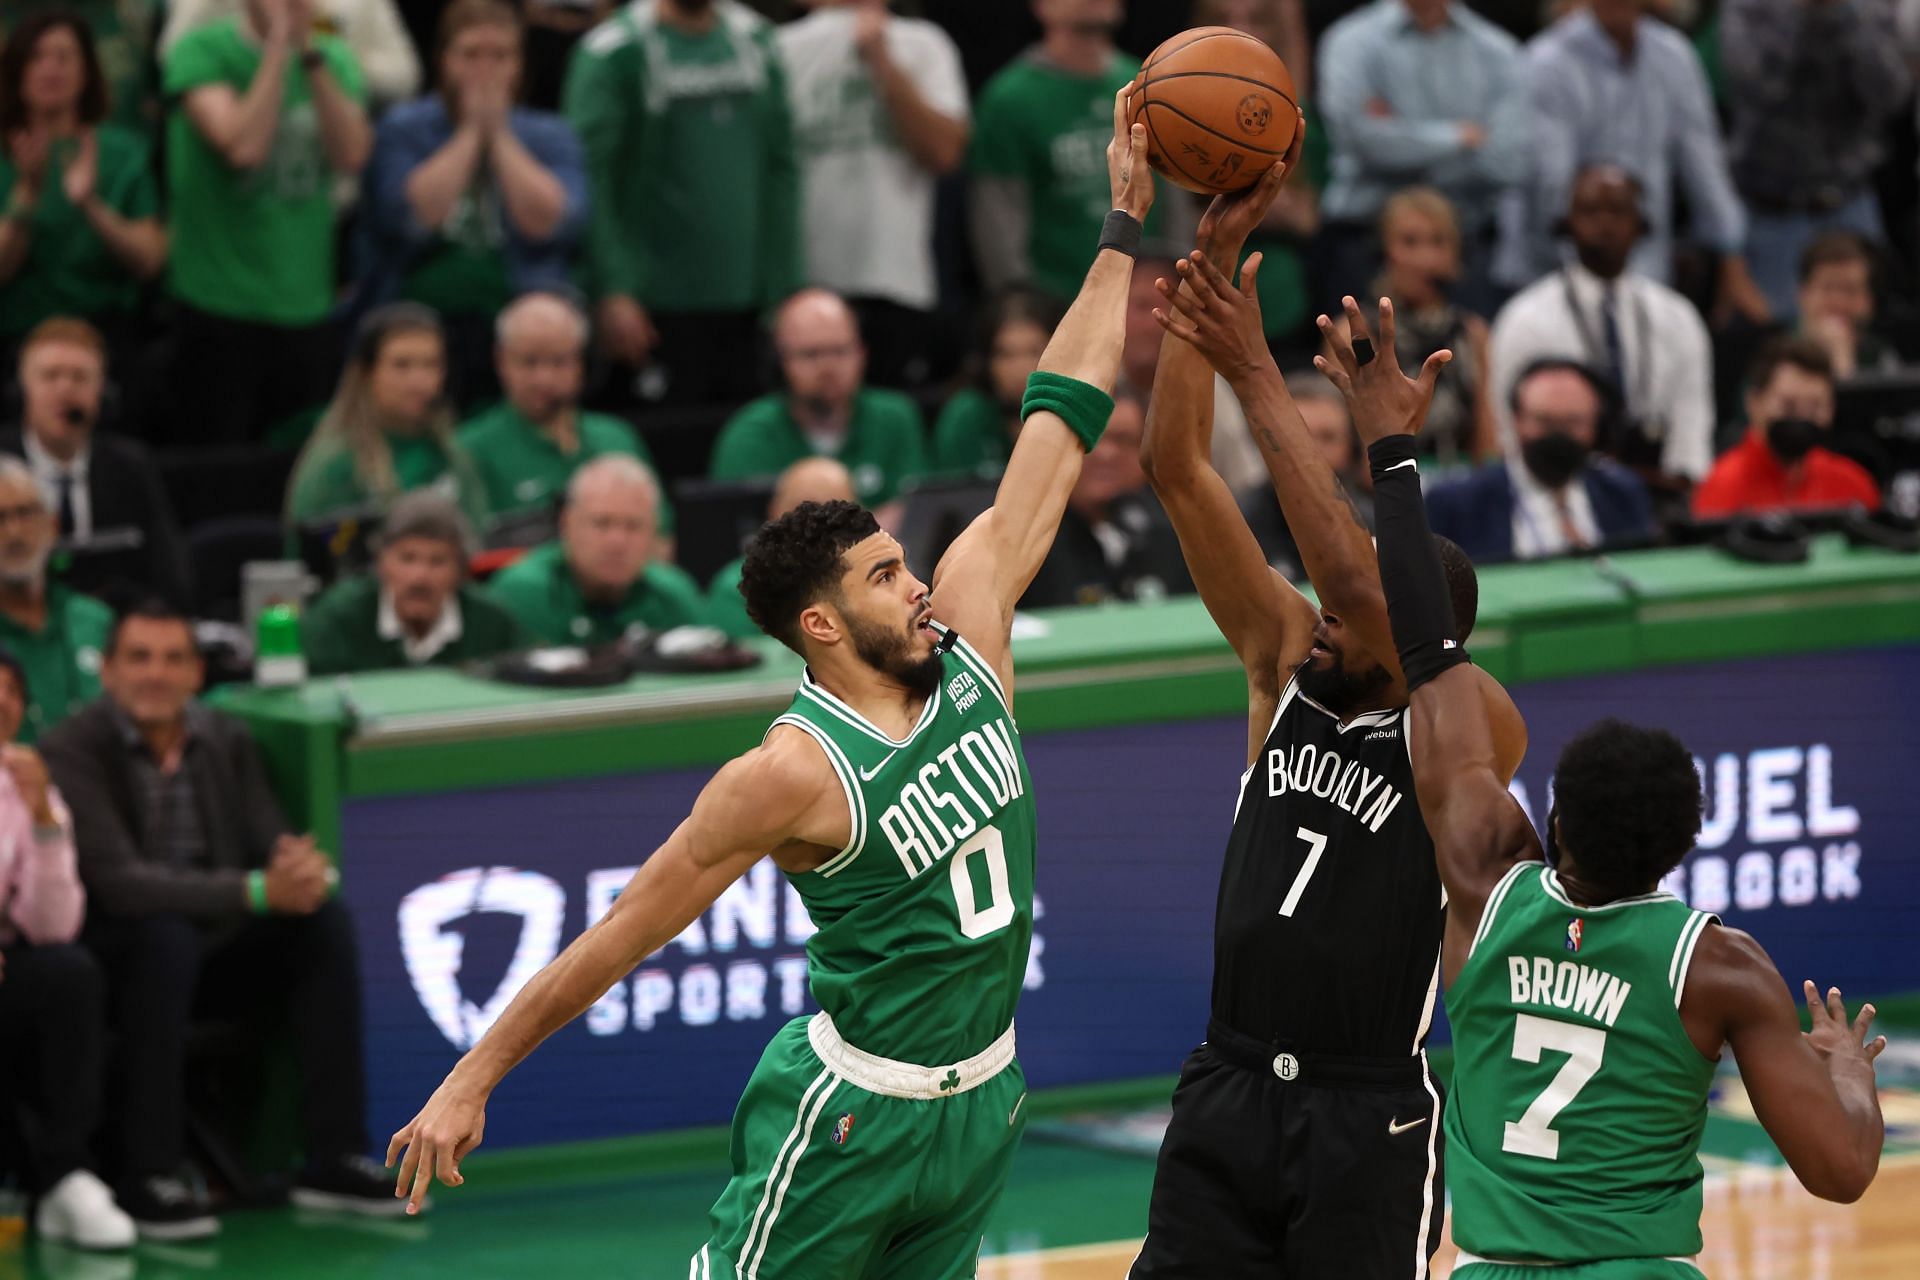 The Brooklyn Nets and the Boston Celtics will play Game 3 of their first-round series in Brooklyn on Saturday night